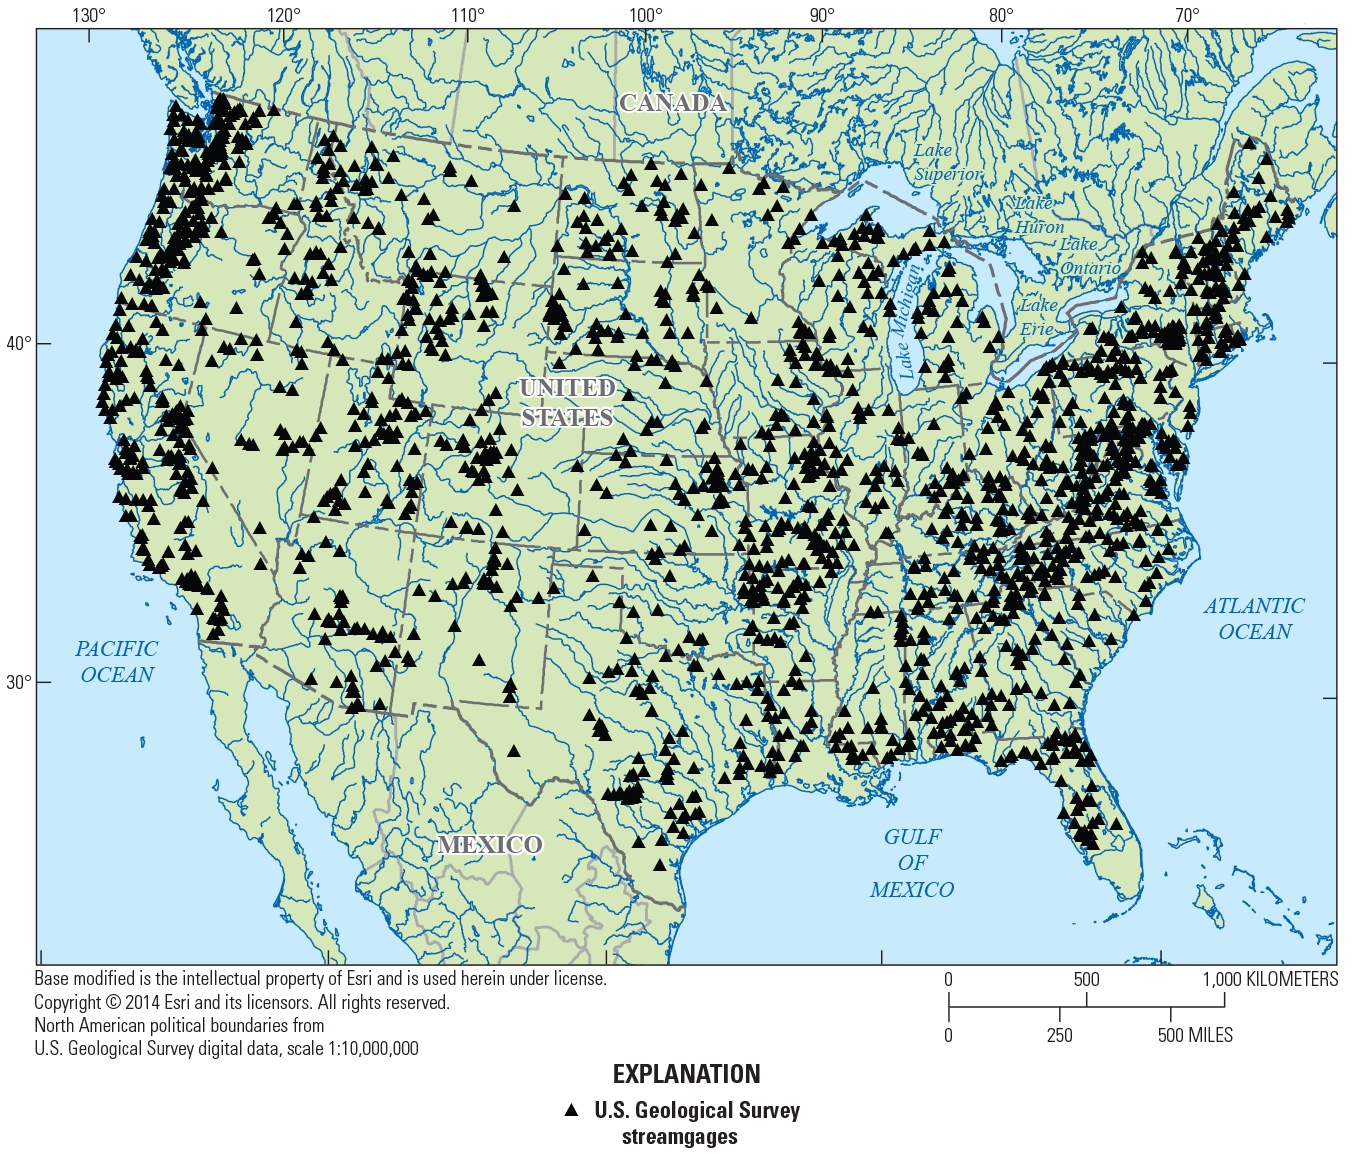 Streamgages in the conterminous United States.